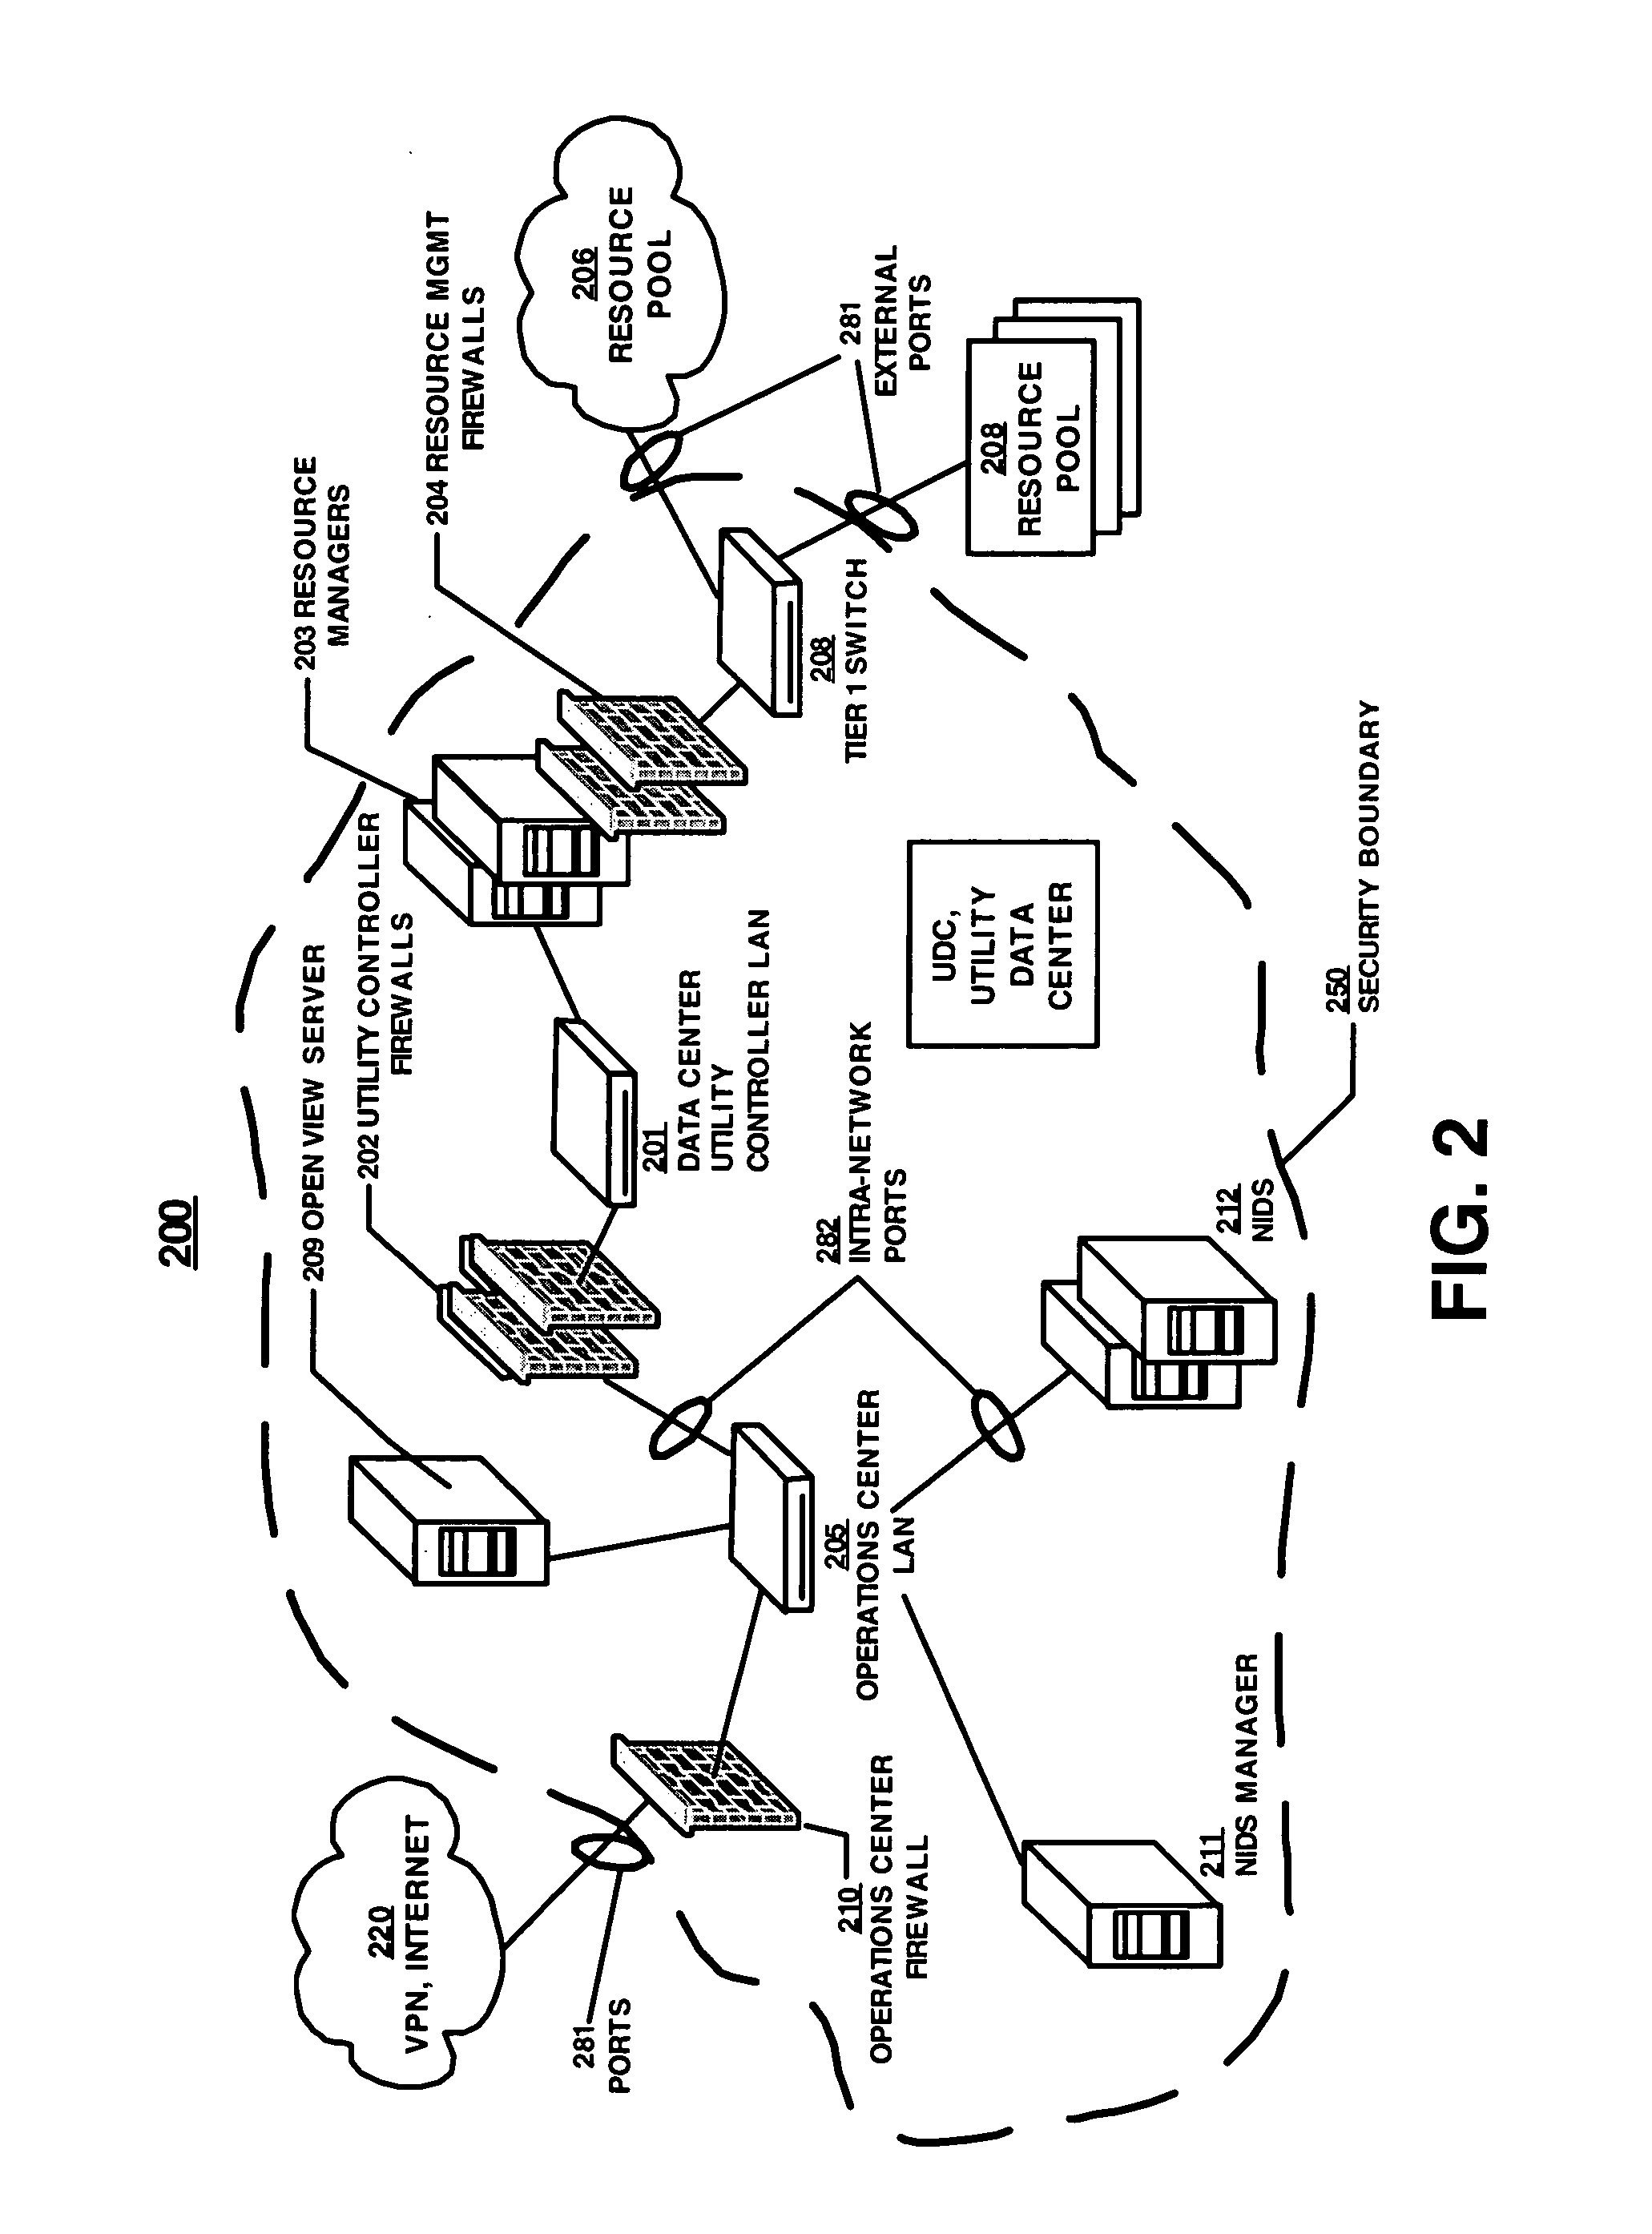 Method and apparatus for automatic and secure distribution of an asymmetric key security credential in a utility computing environment